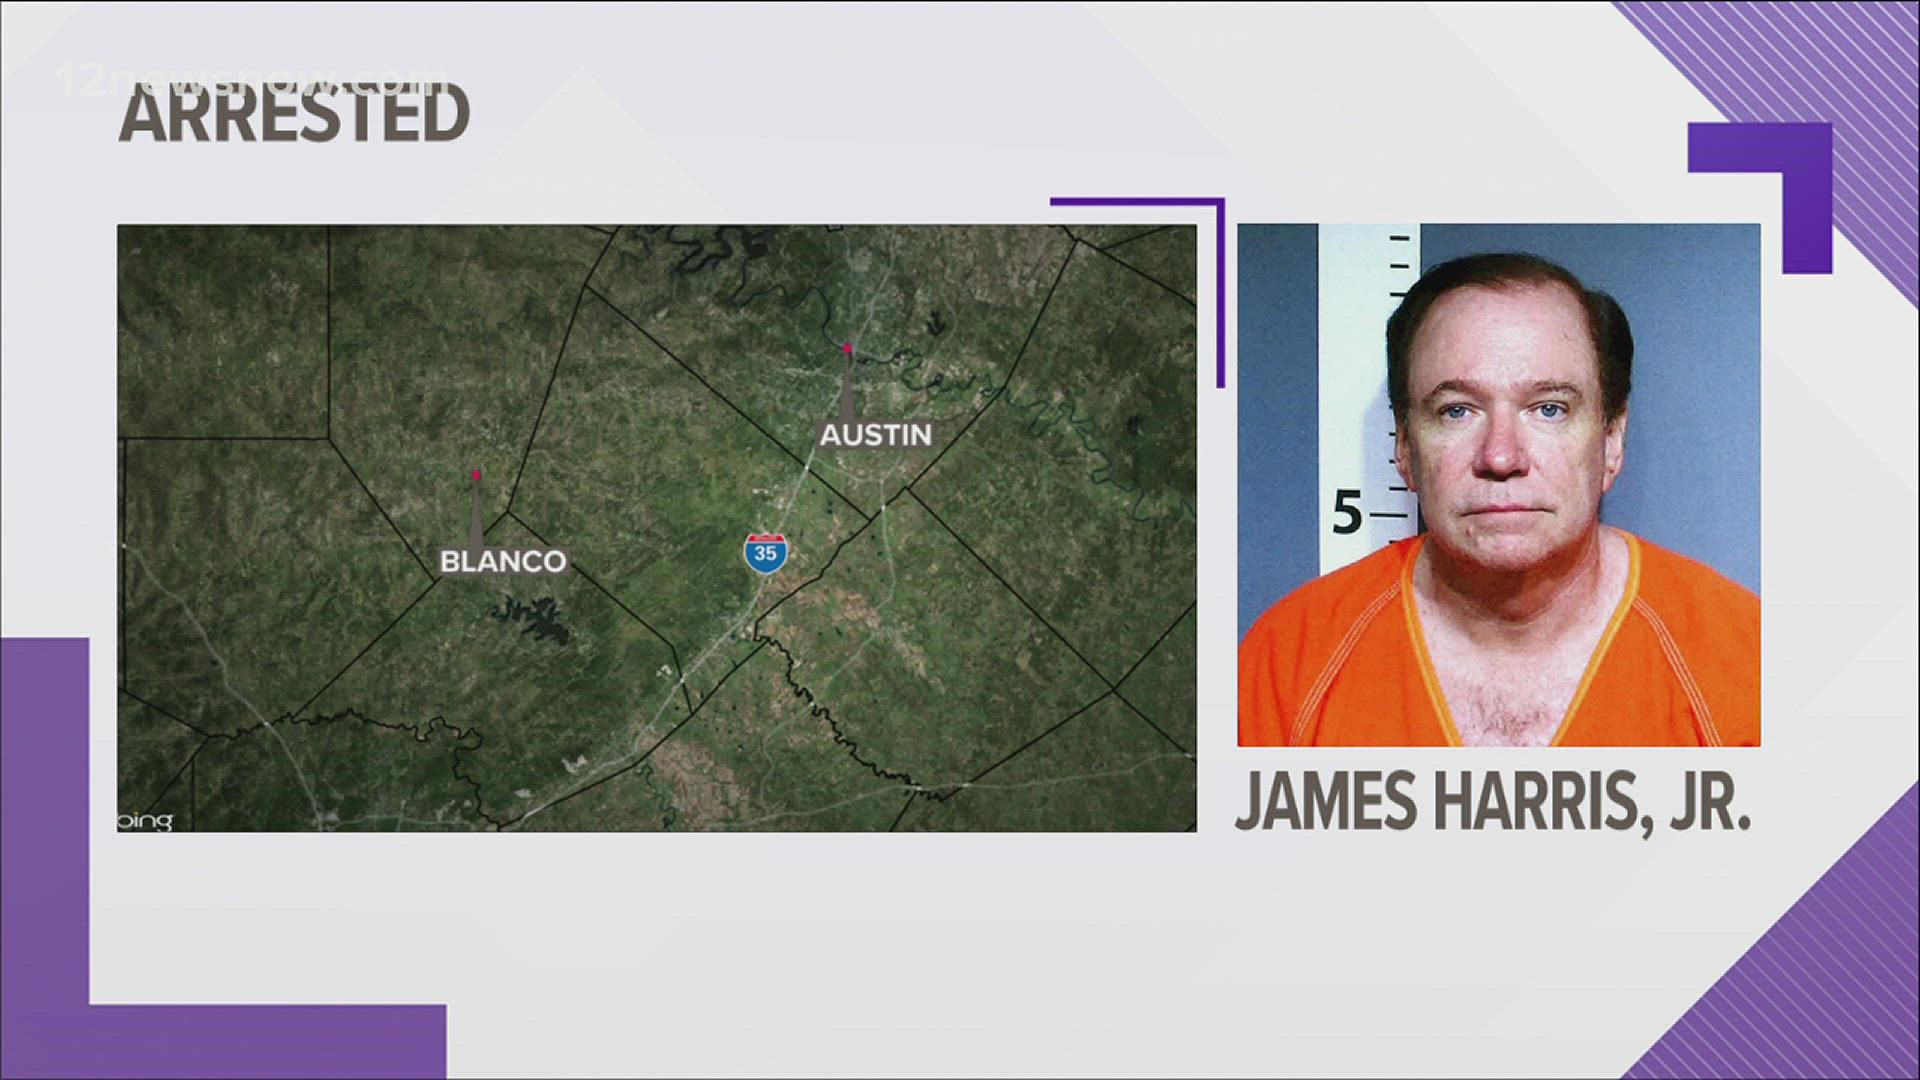 James M. Harris, Jr., 63, is accused of fatally shooting Donald Boumans, 25, late Saturday night, August 28, 2021, in Blanco County.